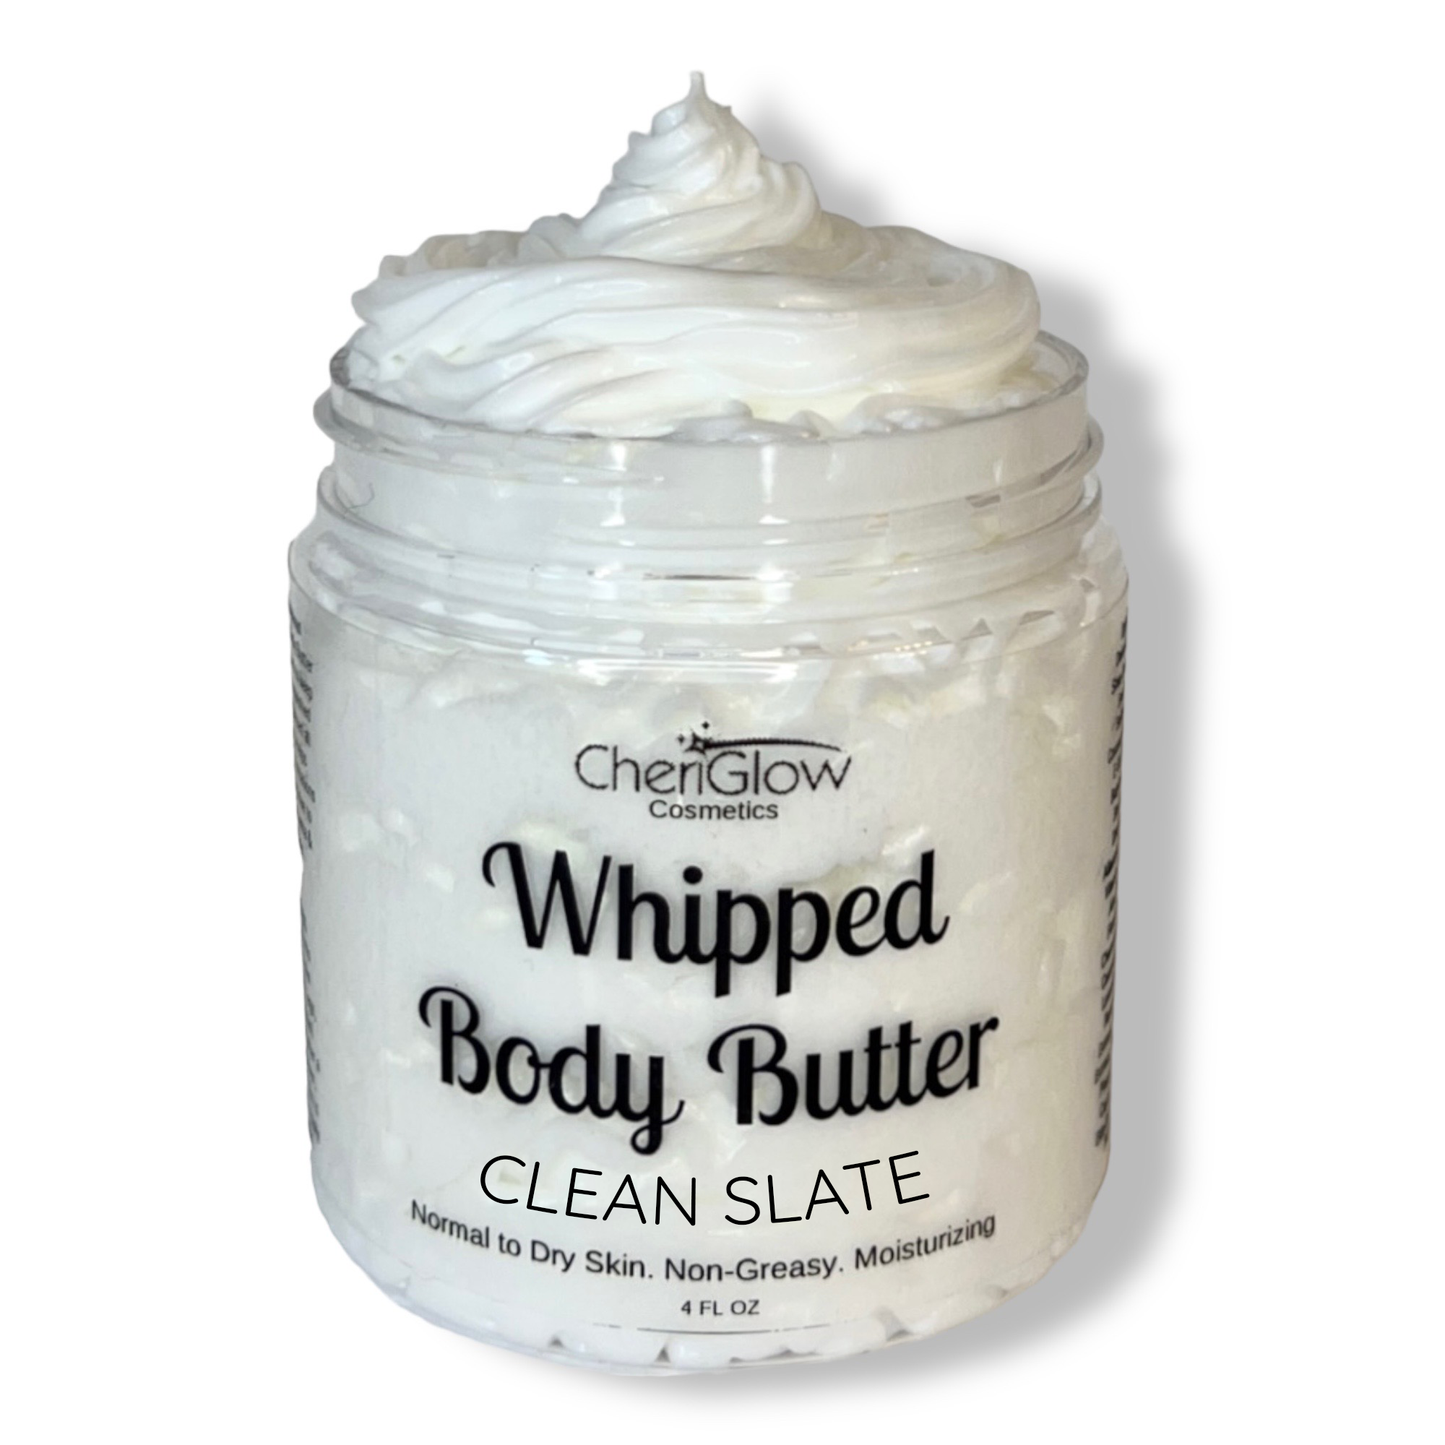 Whipped Body Butter - Clean Slate